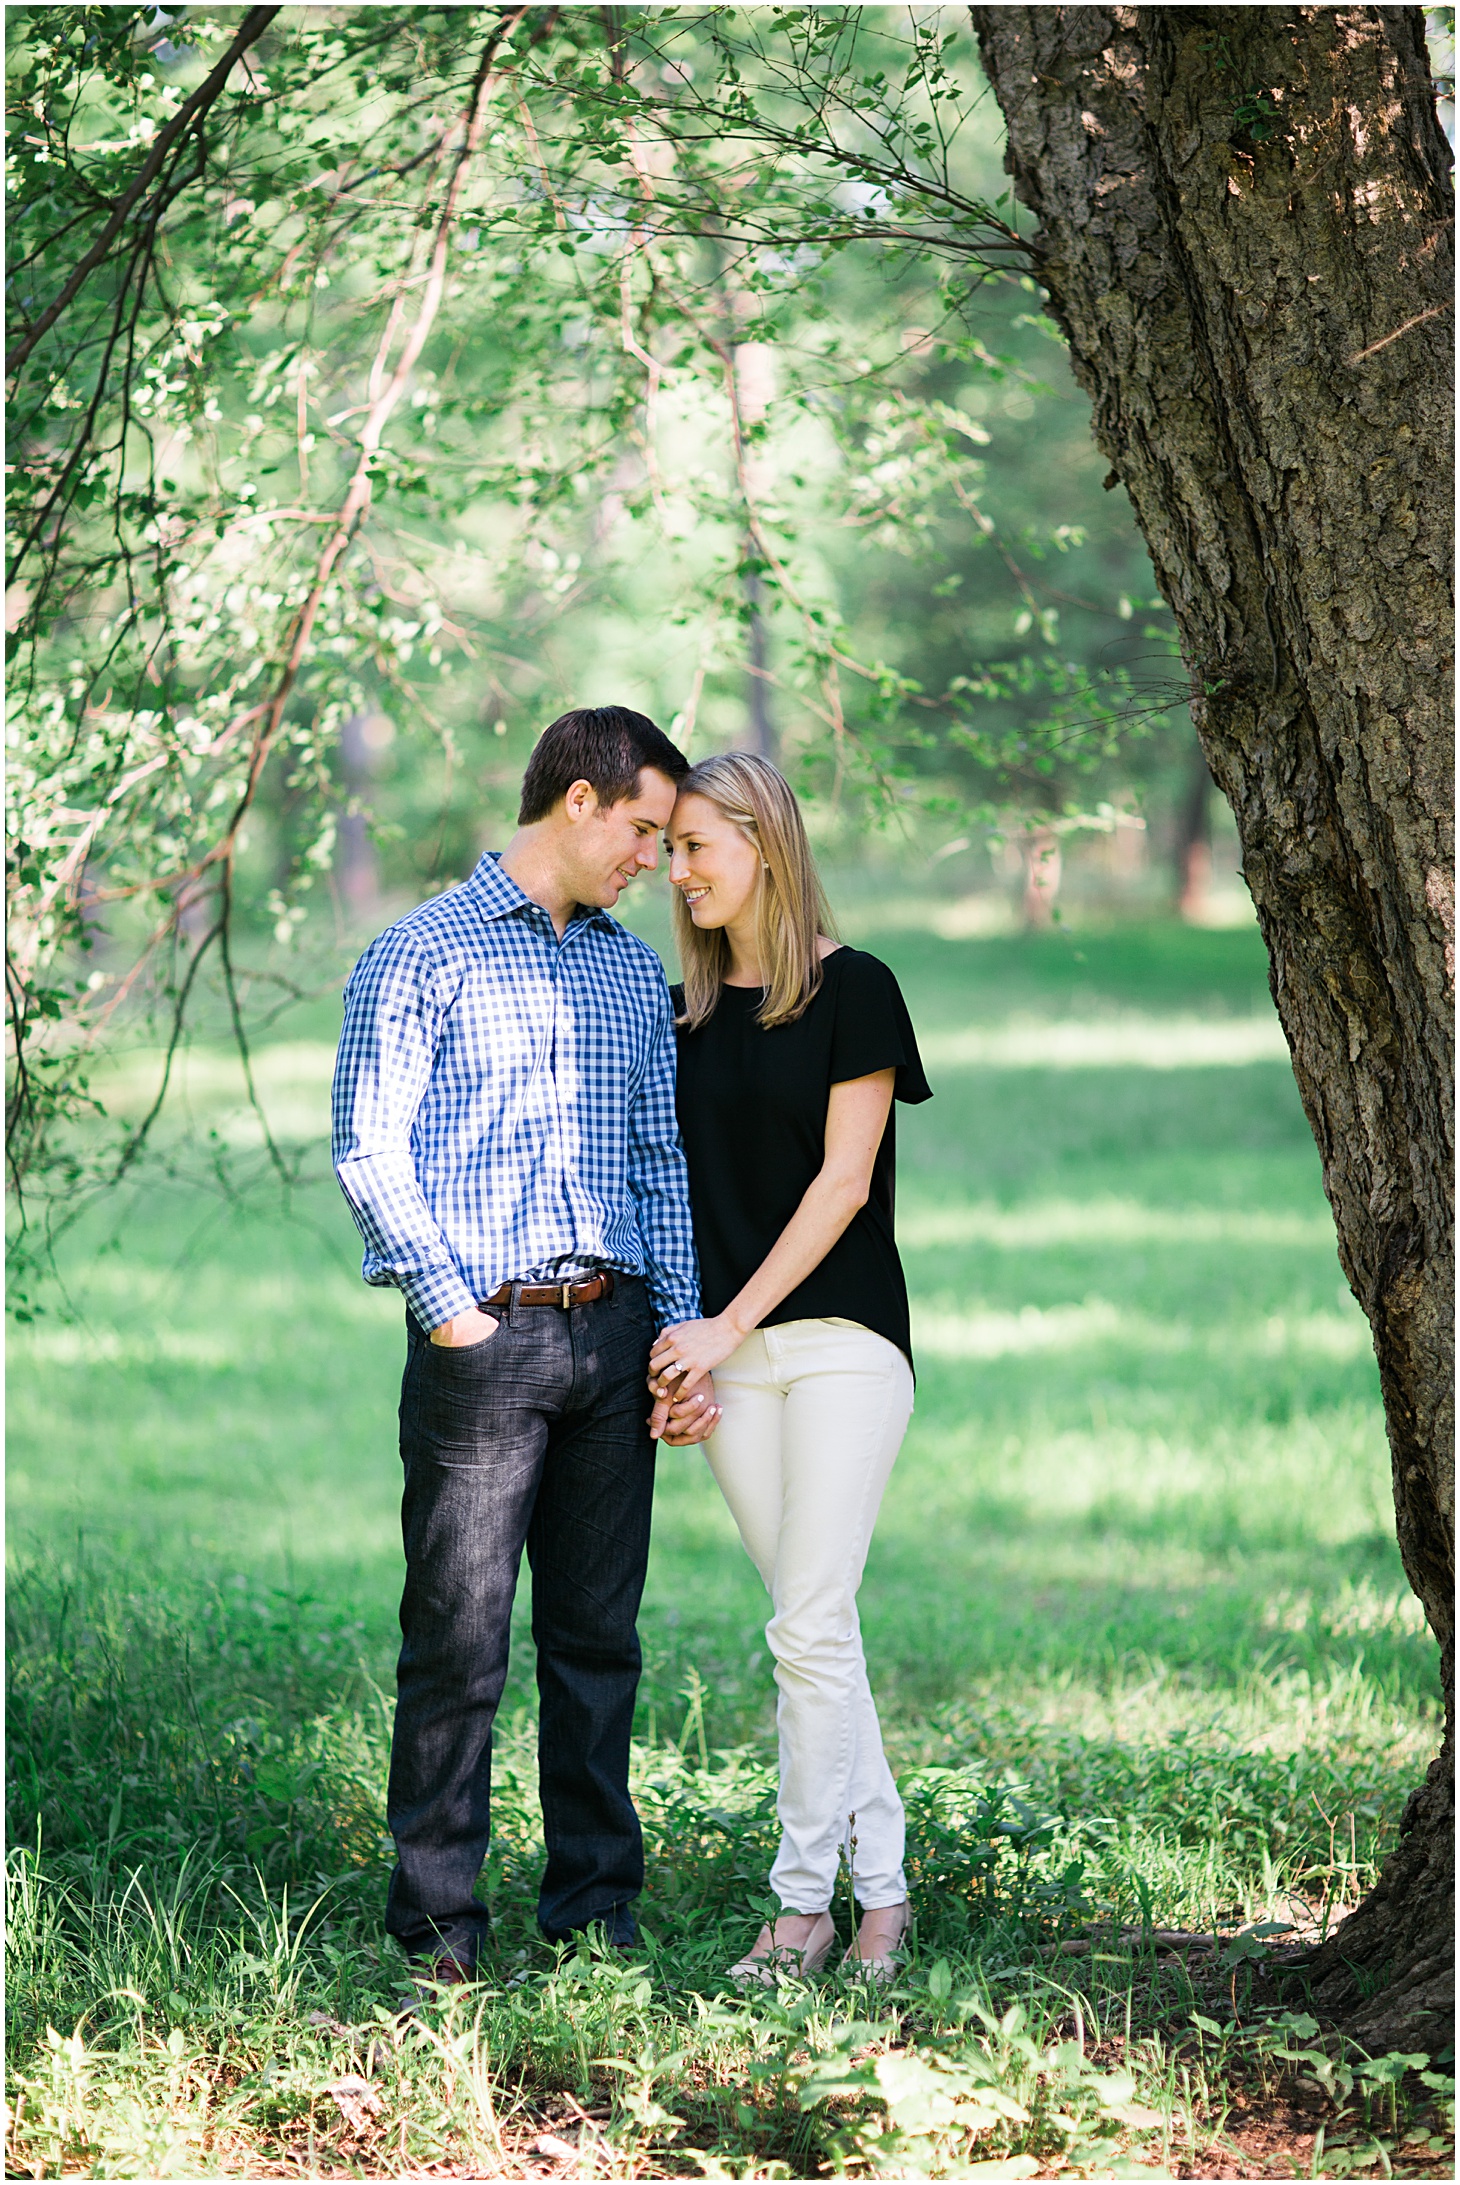 intimate-sunrise-engagement-session-at-the-lincoln-memorial-by-sarah-bradshaw-photography_0021